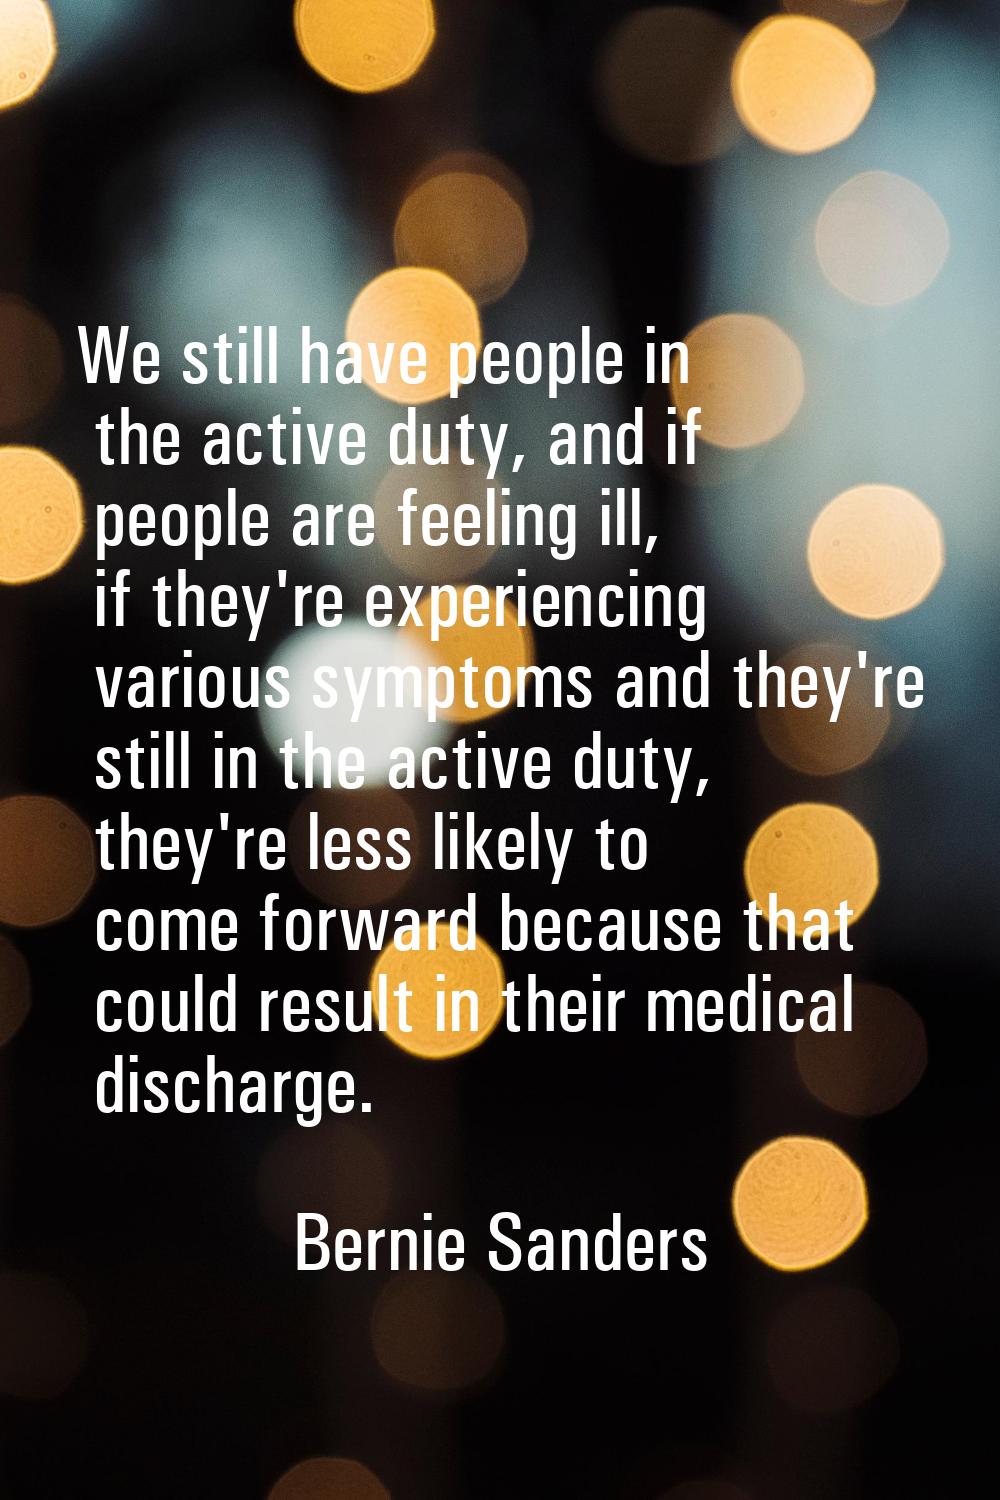 We still have people in the active duty, and if people are feeling ill, if they're experiencing var